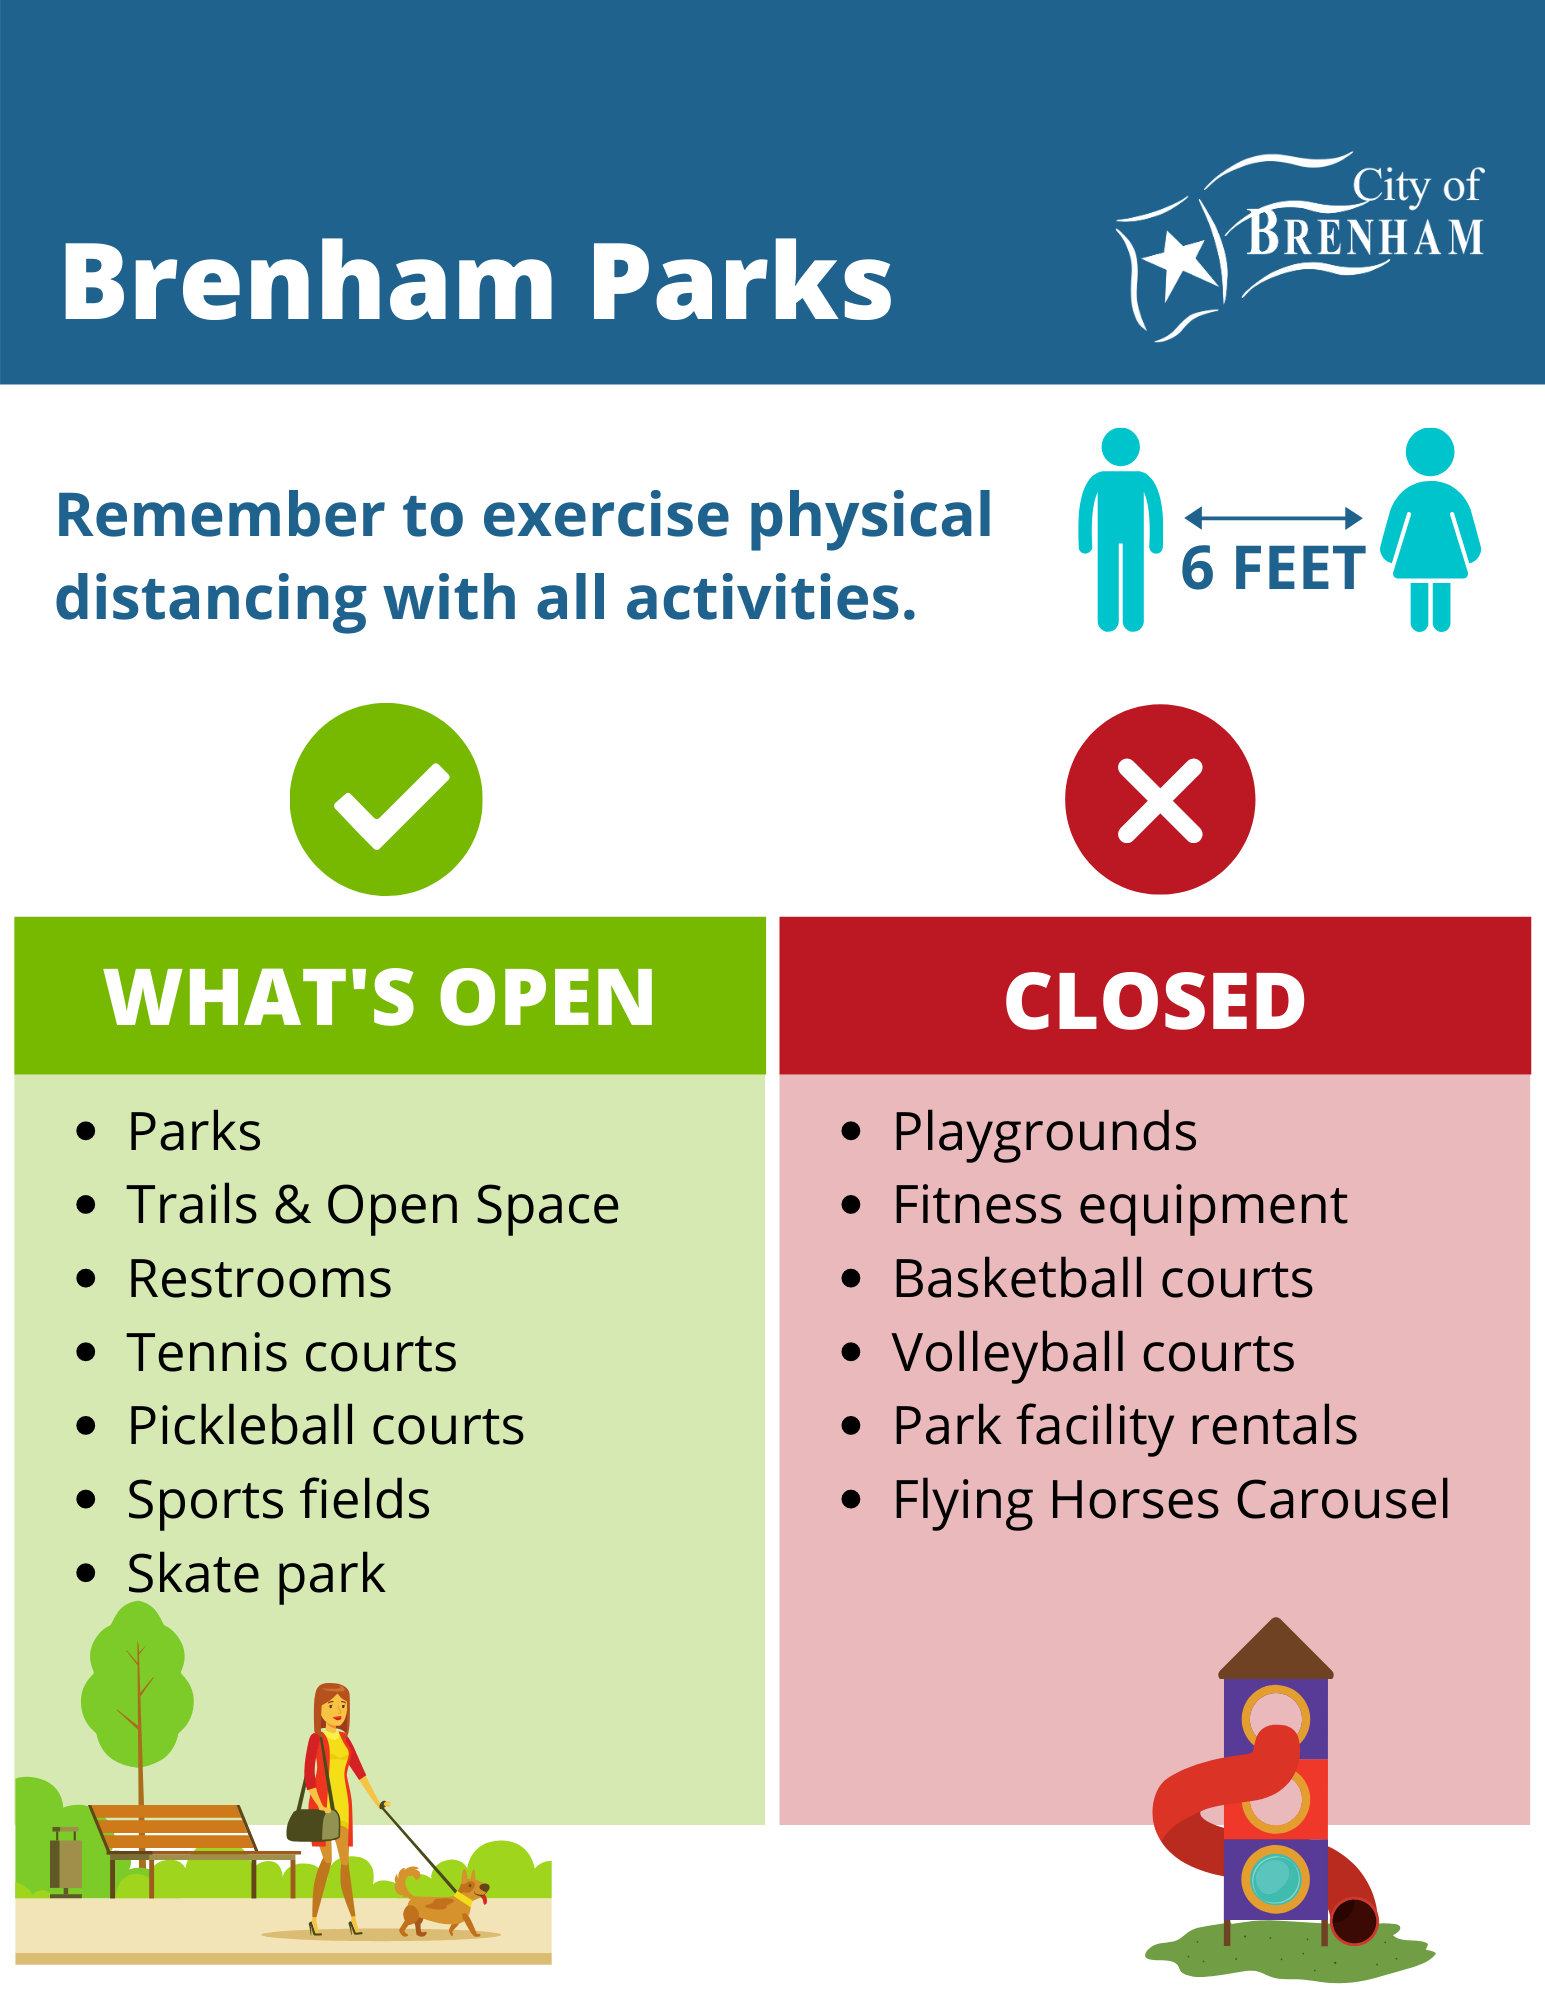 parks-whats-open graphic - image includes text found on page to reiterate what is open and what is closed.